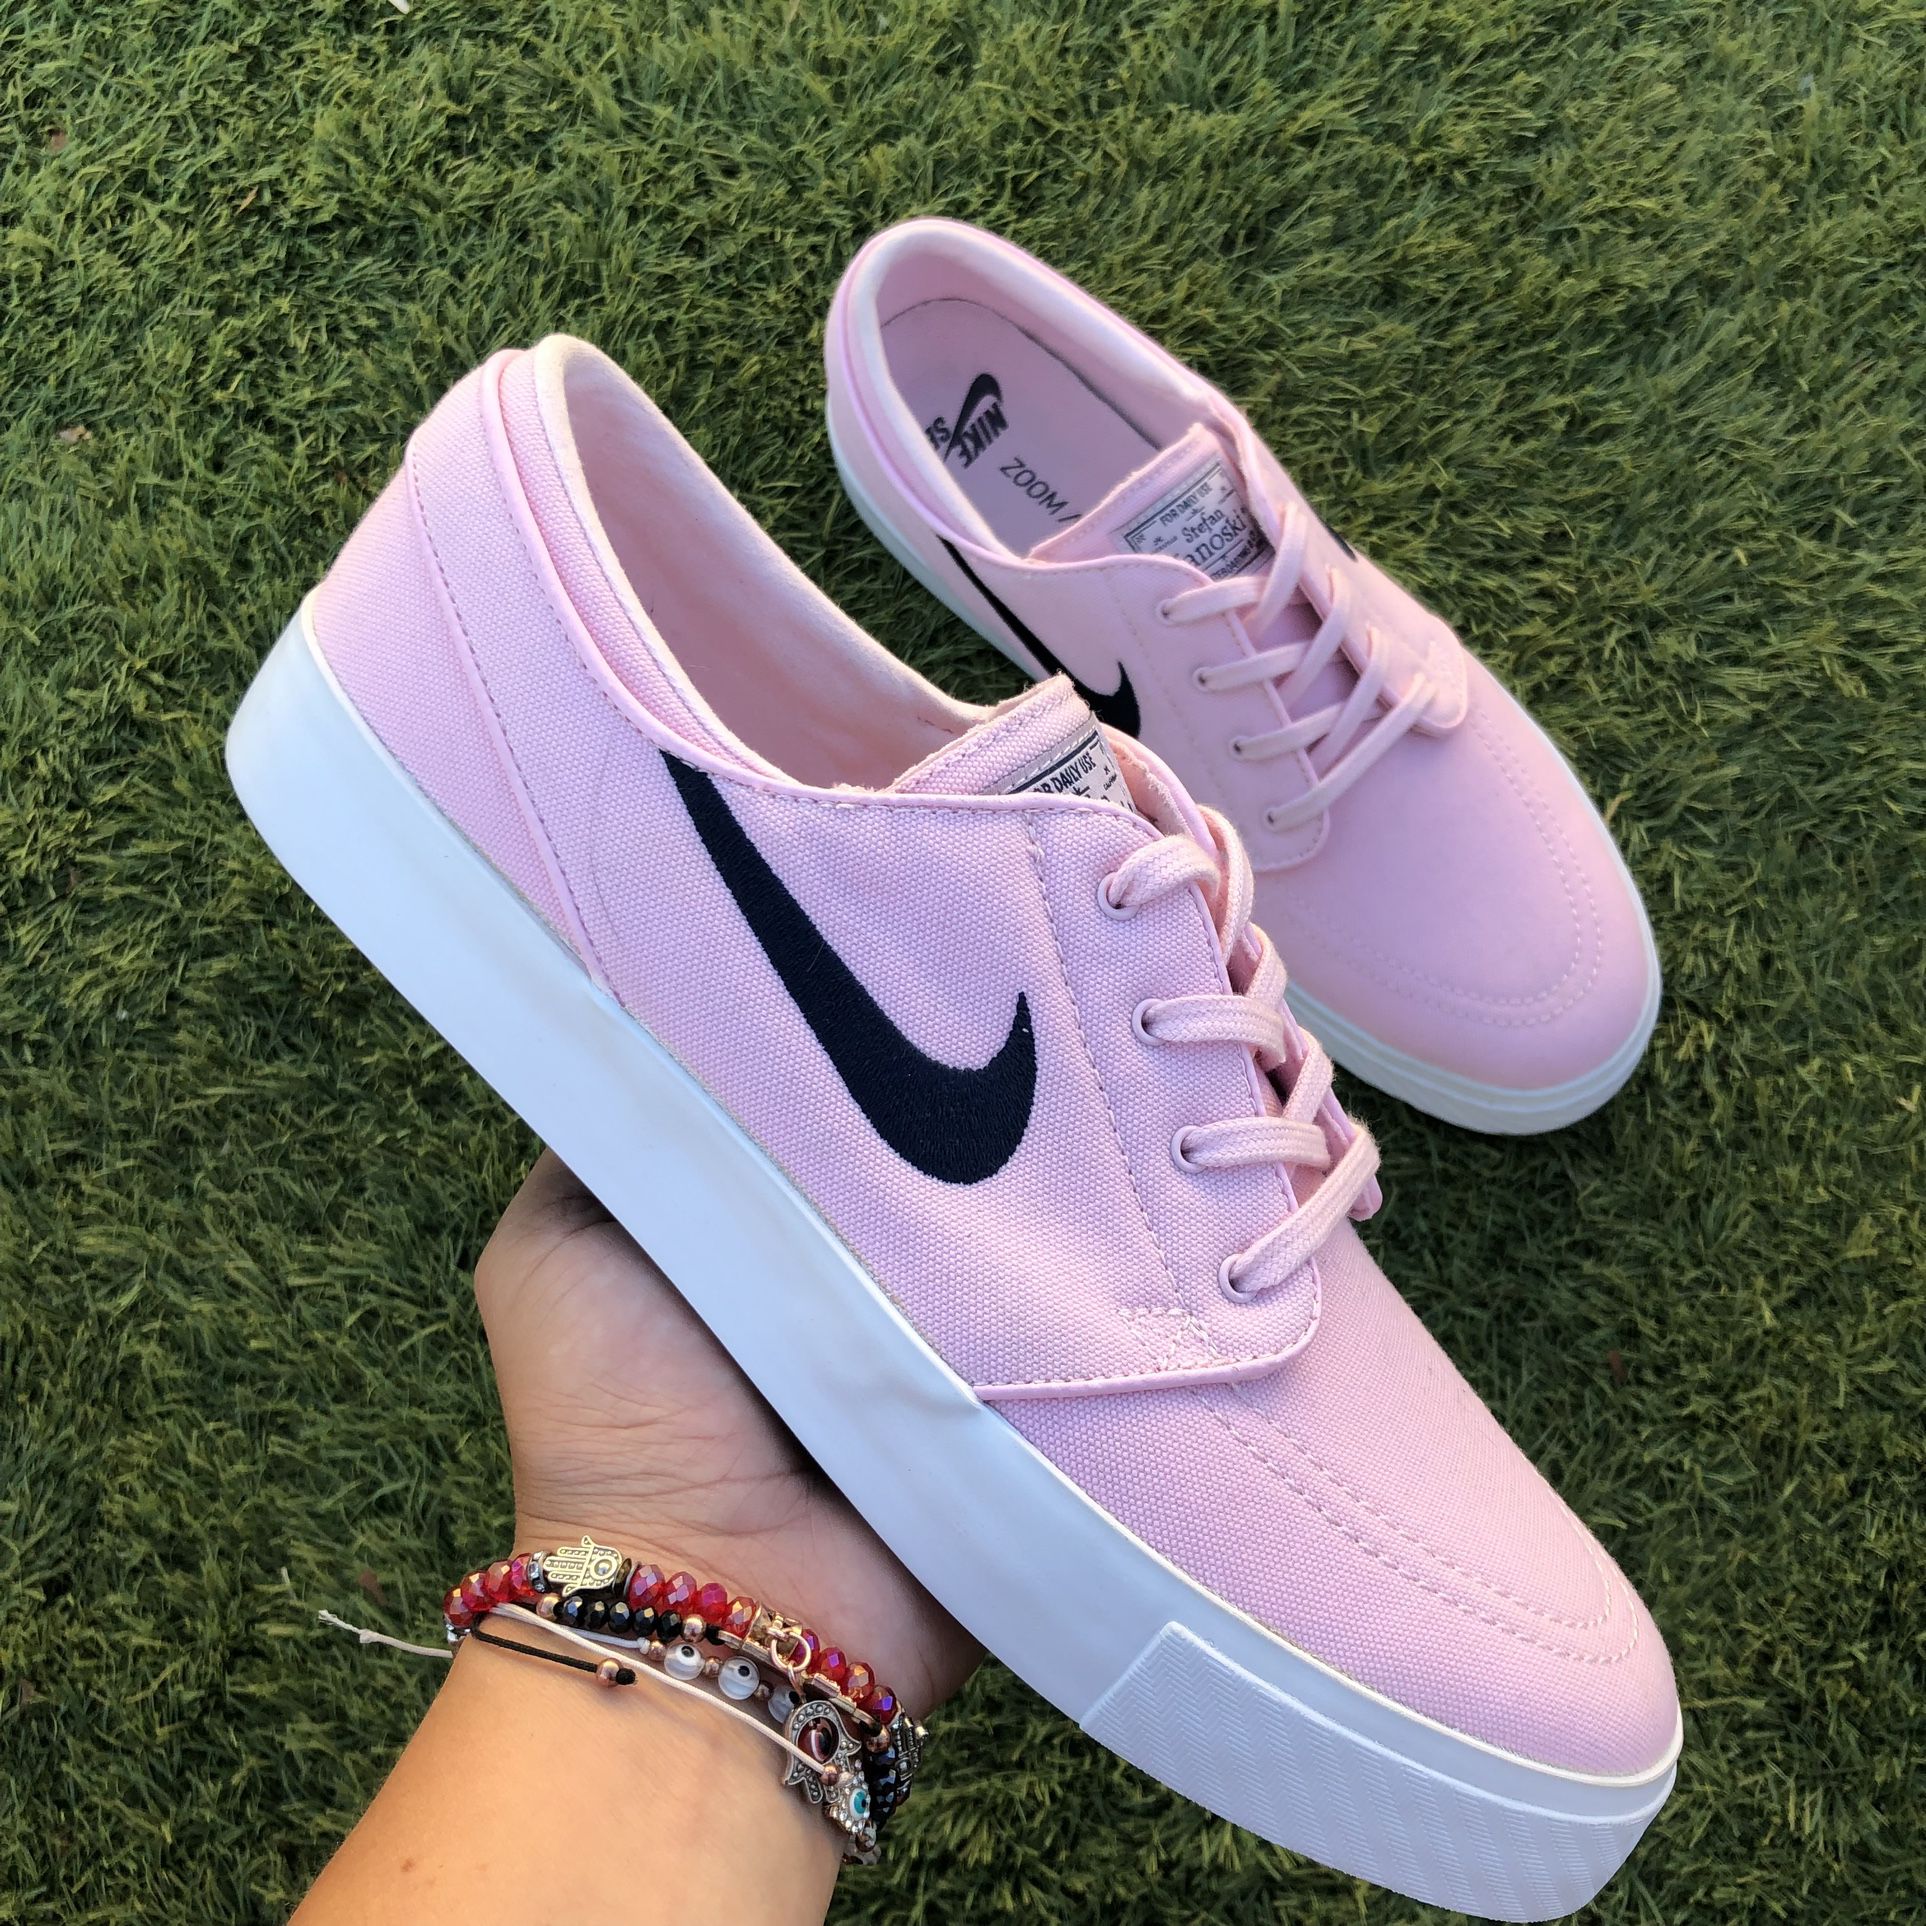 Nike Stefan Janoski SB Shoes - clothing & accessories - by owner